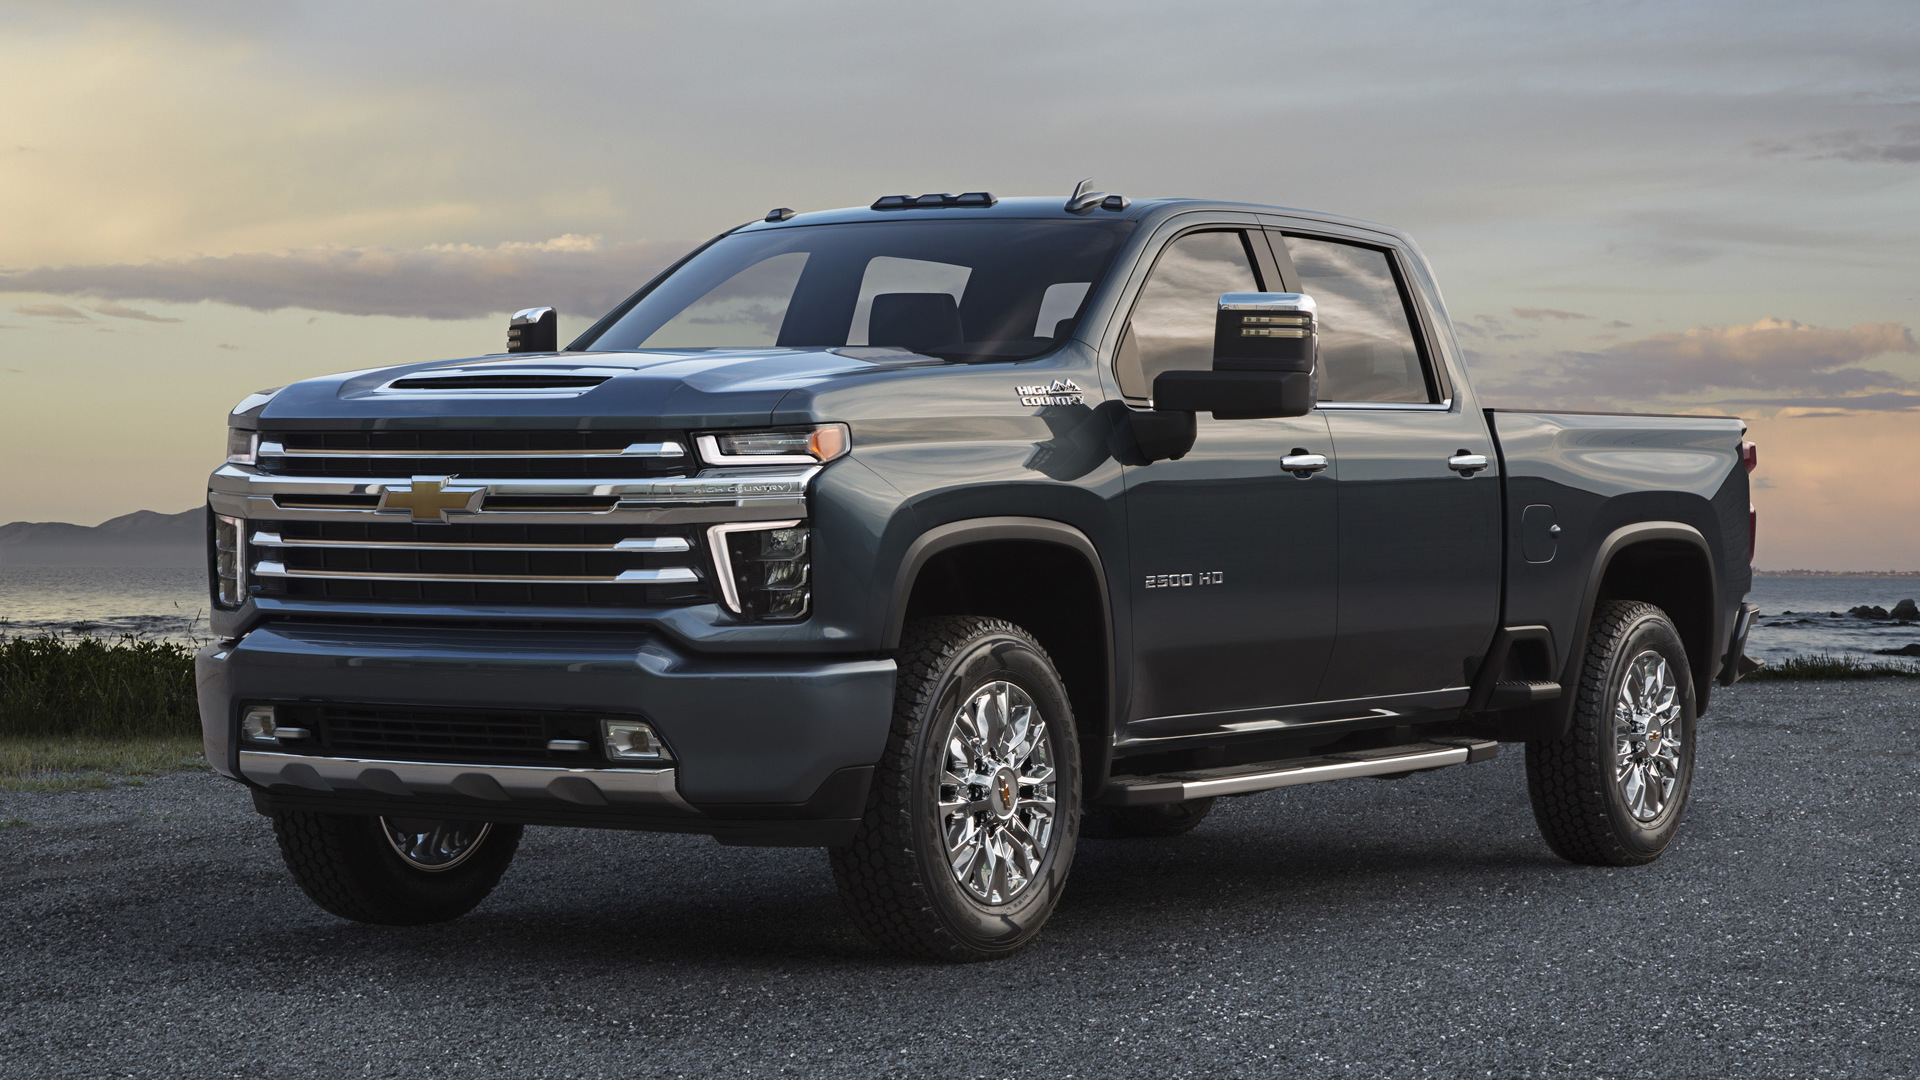 2020 Chevy Silverado 2500HD High Country More bling, less butch